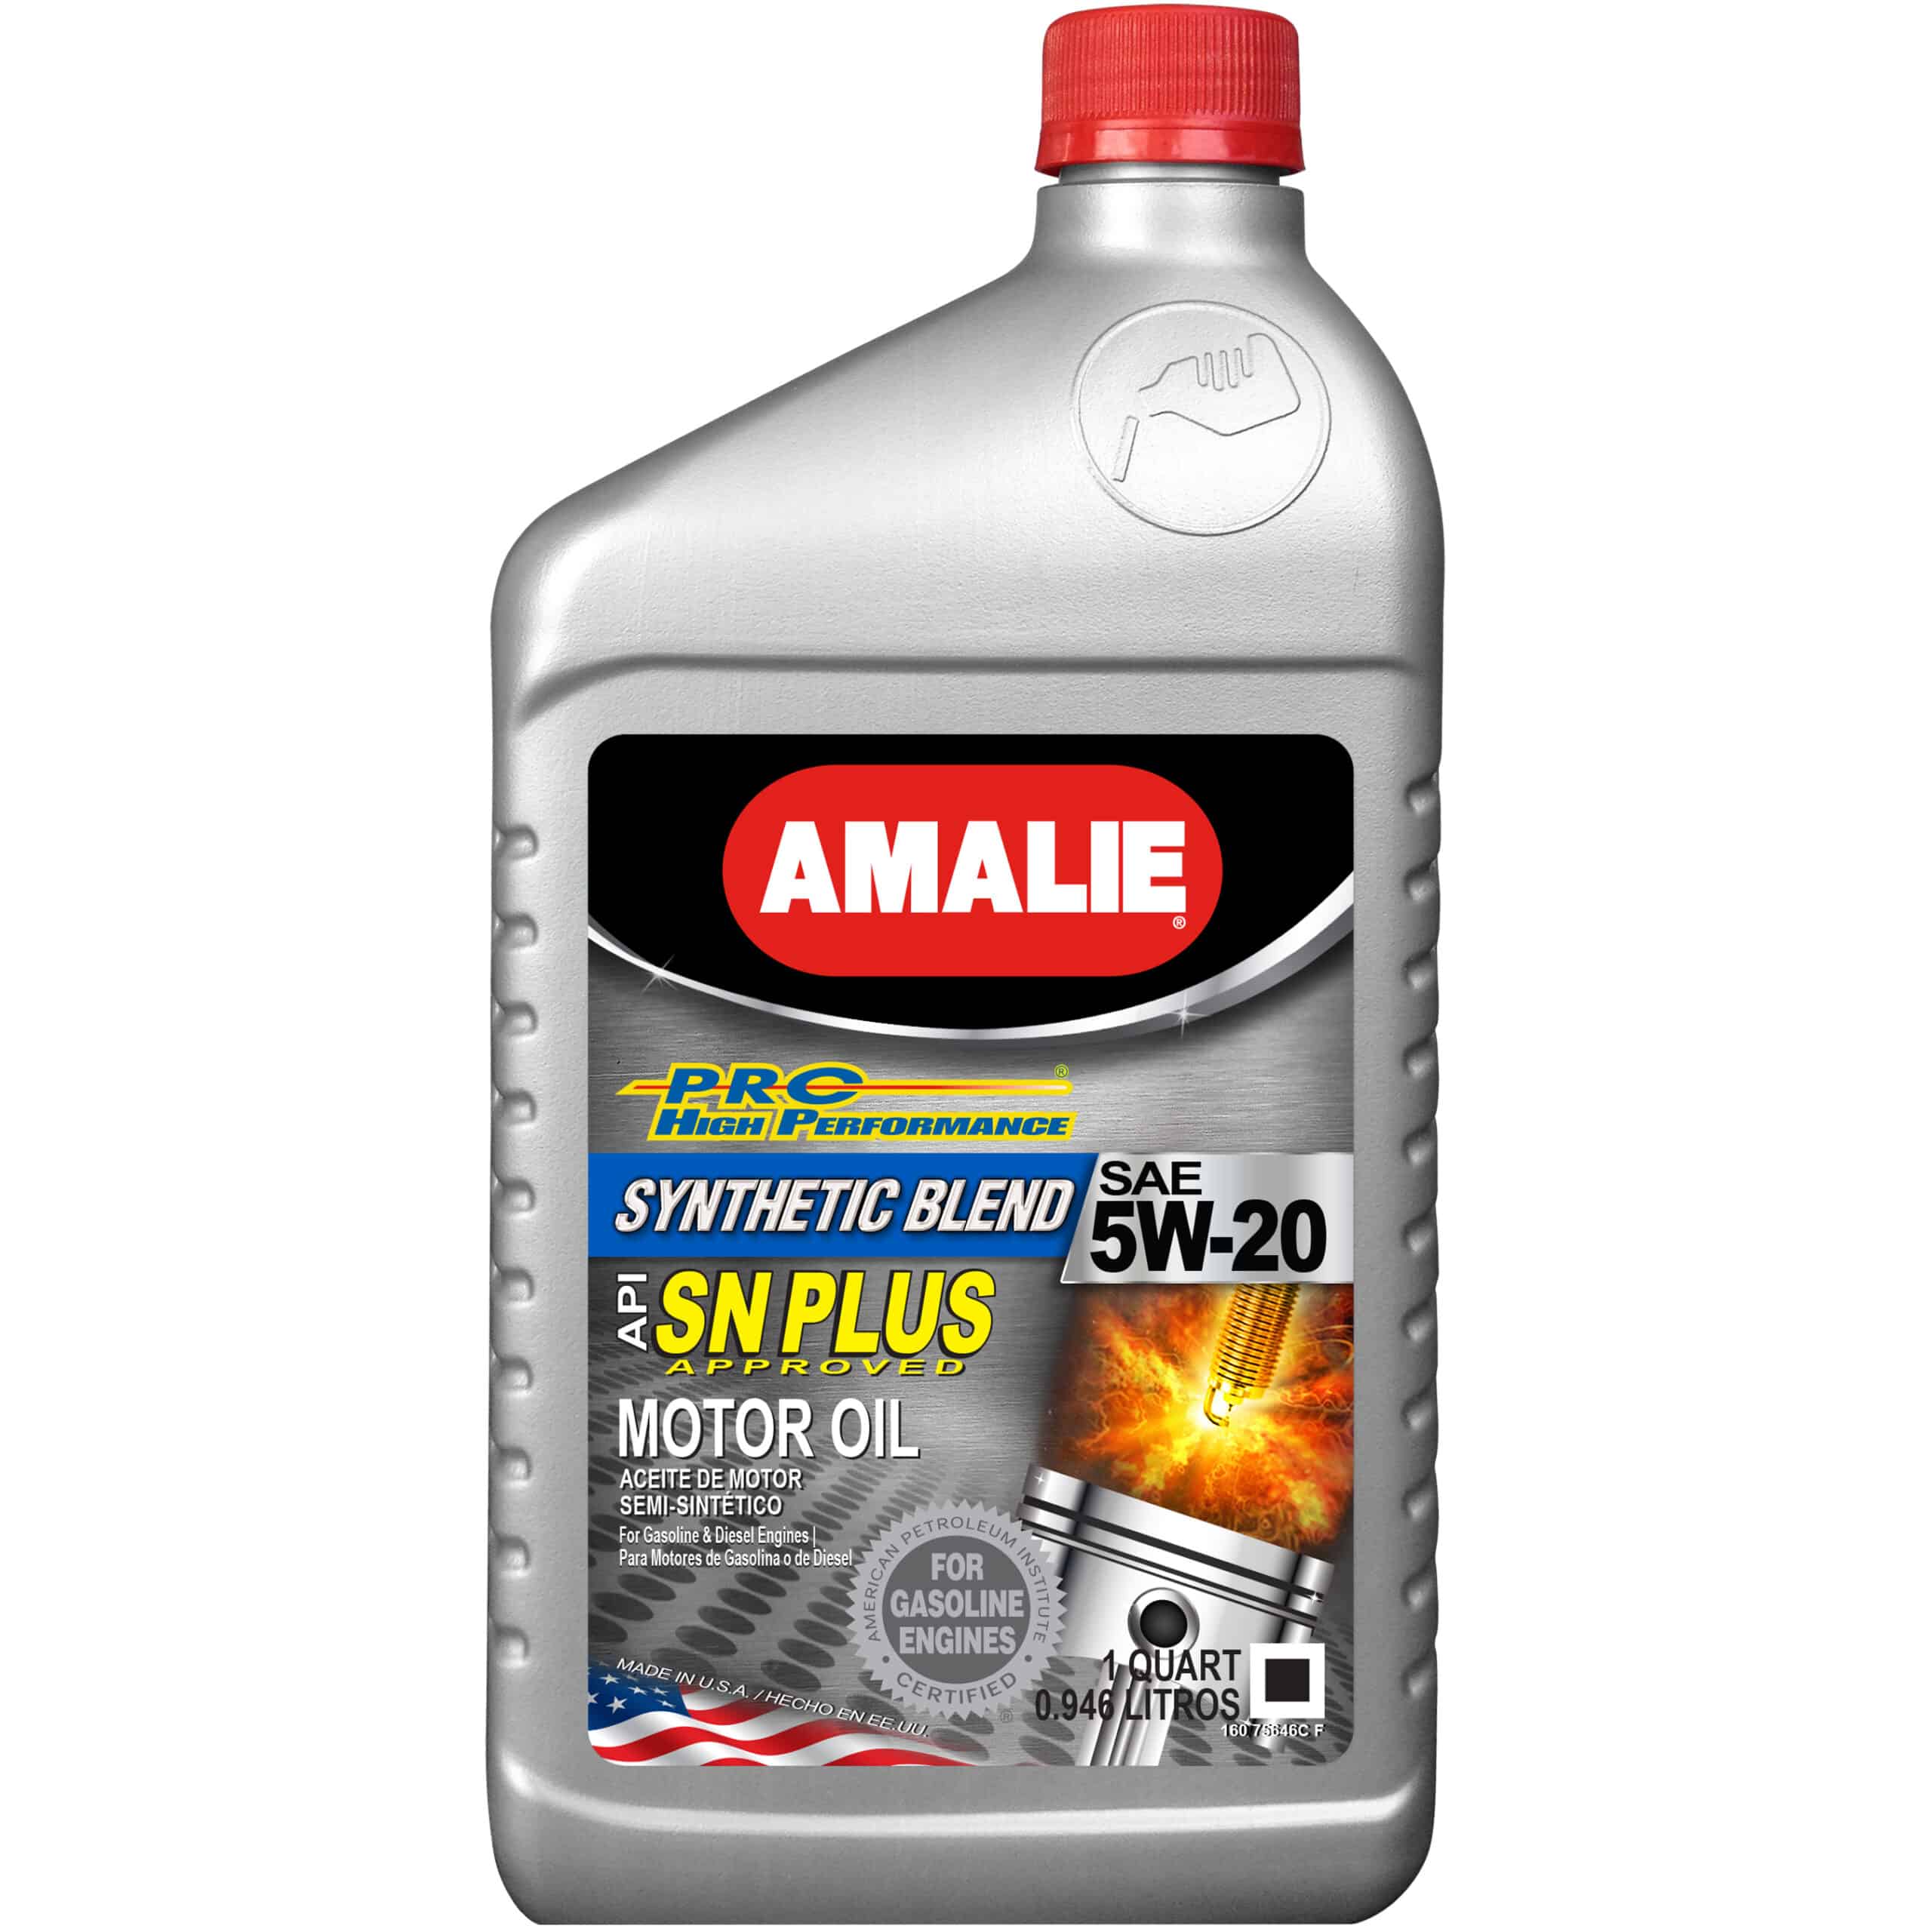 Amalie Oil Pro High Performance Synthetic Blend 5W-20